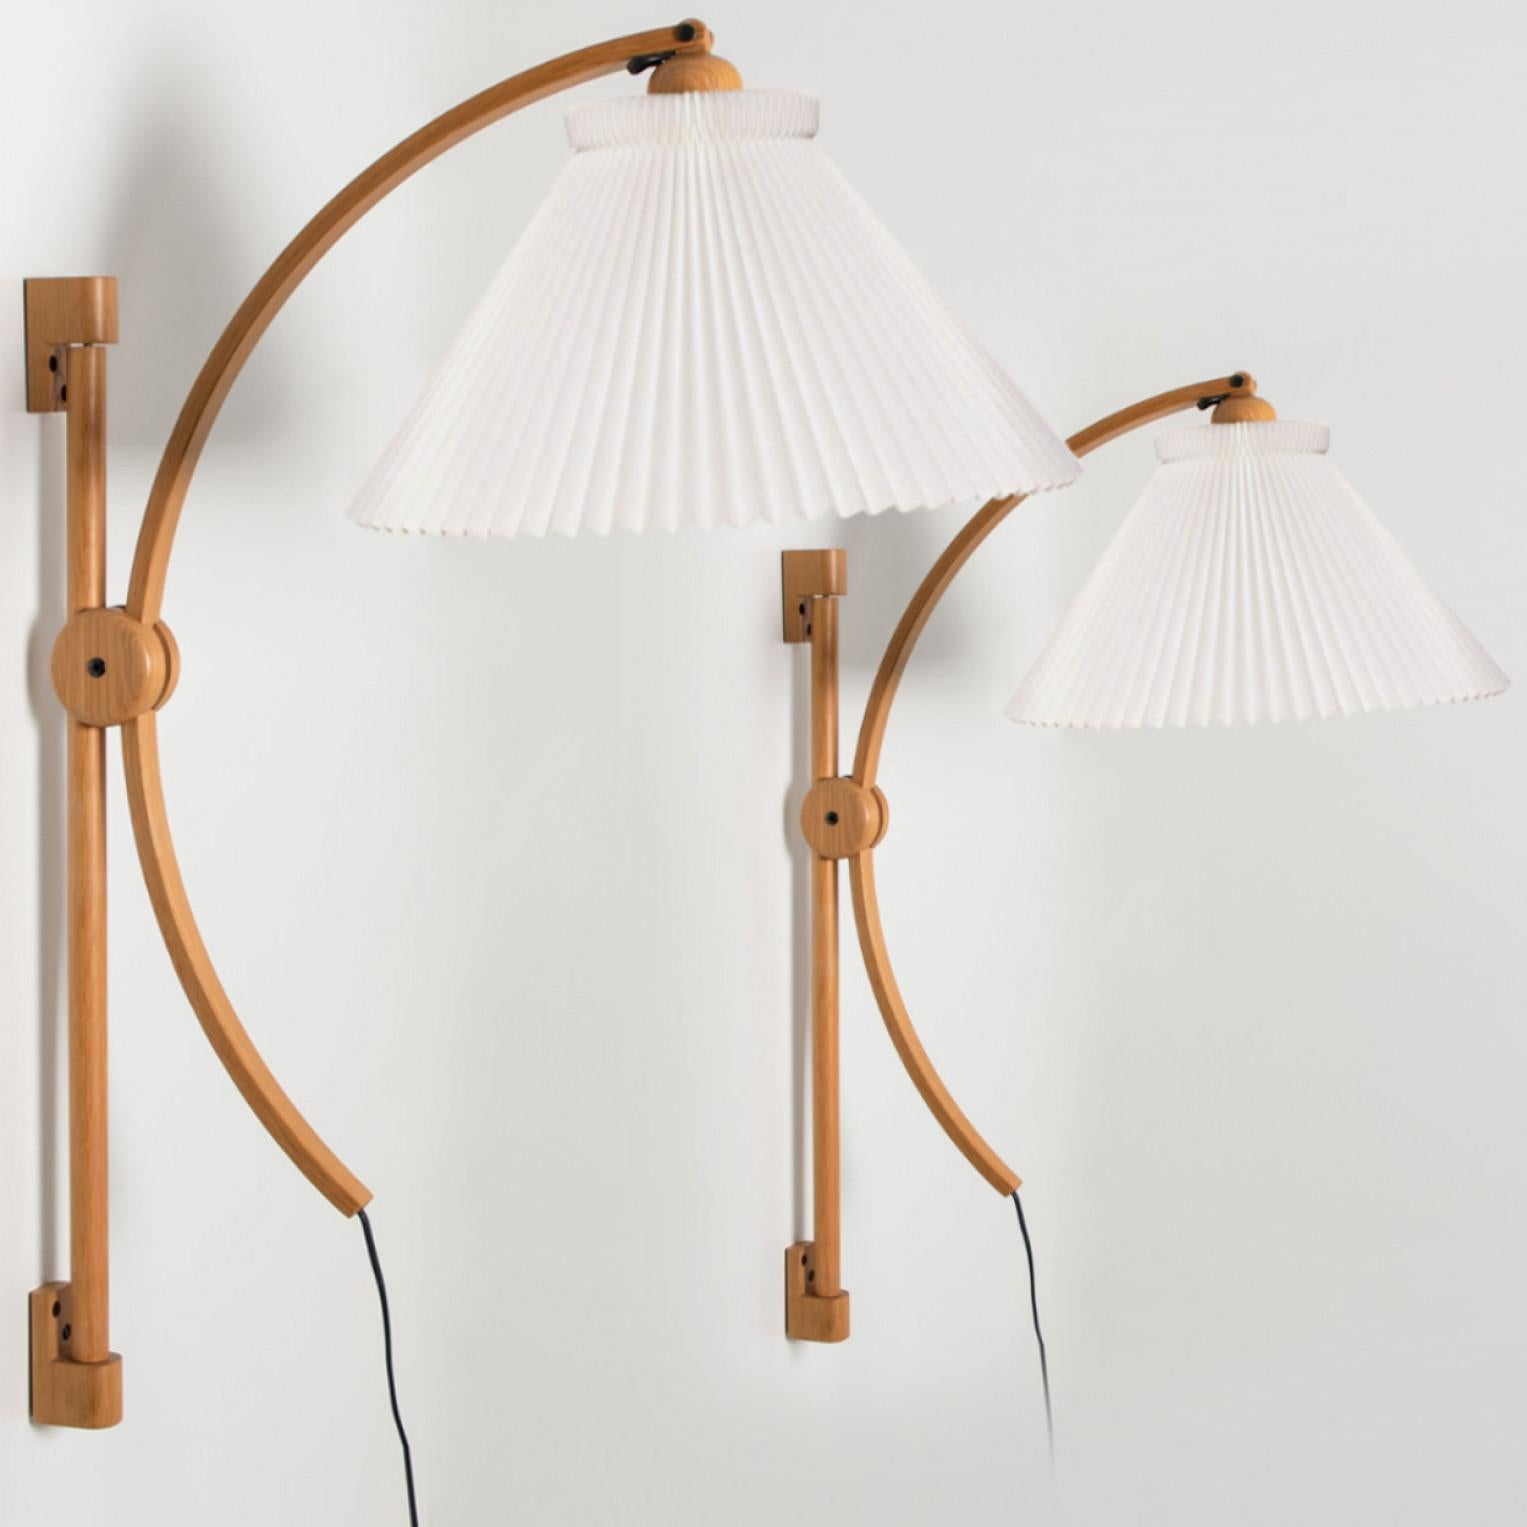 Pair of Wooden Wall Lights with New Le Klint Shade by Domus Germany, 1970s In Good Condition For Sale In Rijssen, NL